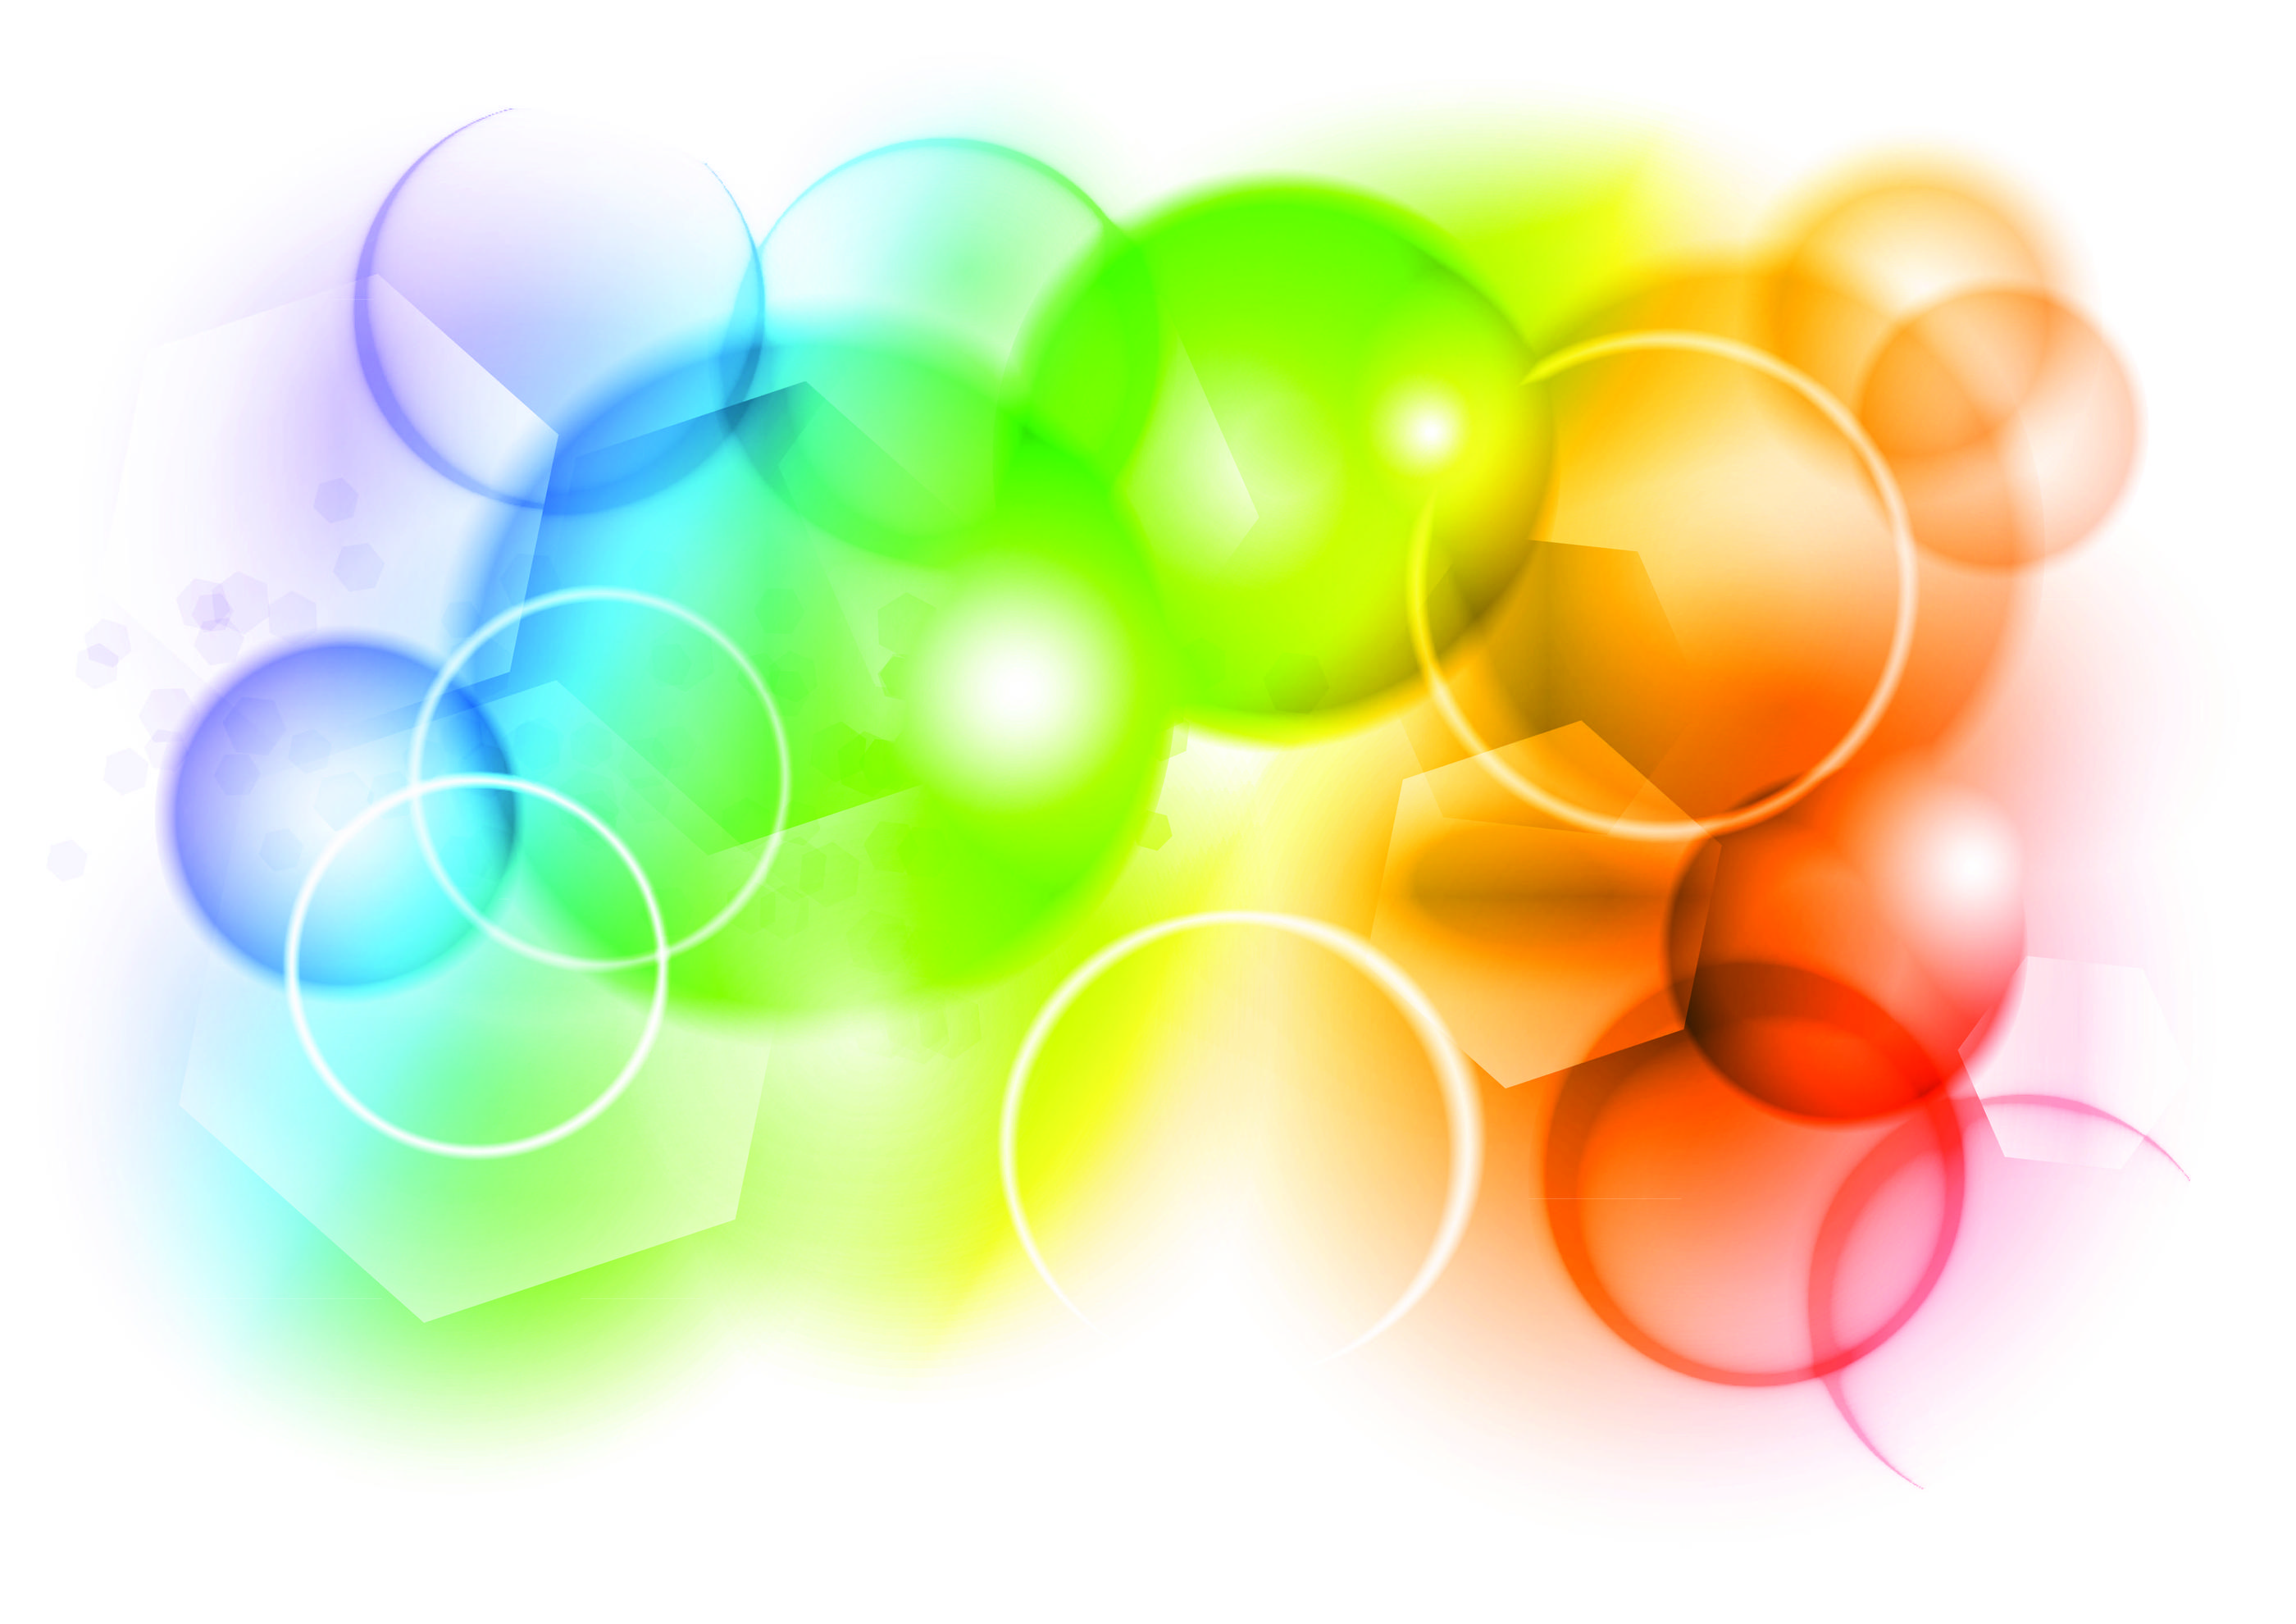 Colorful bubbles background vector Free Vector / 4Vector